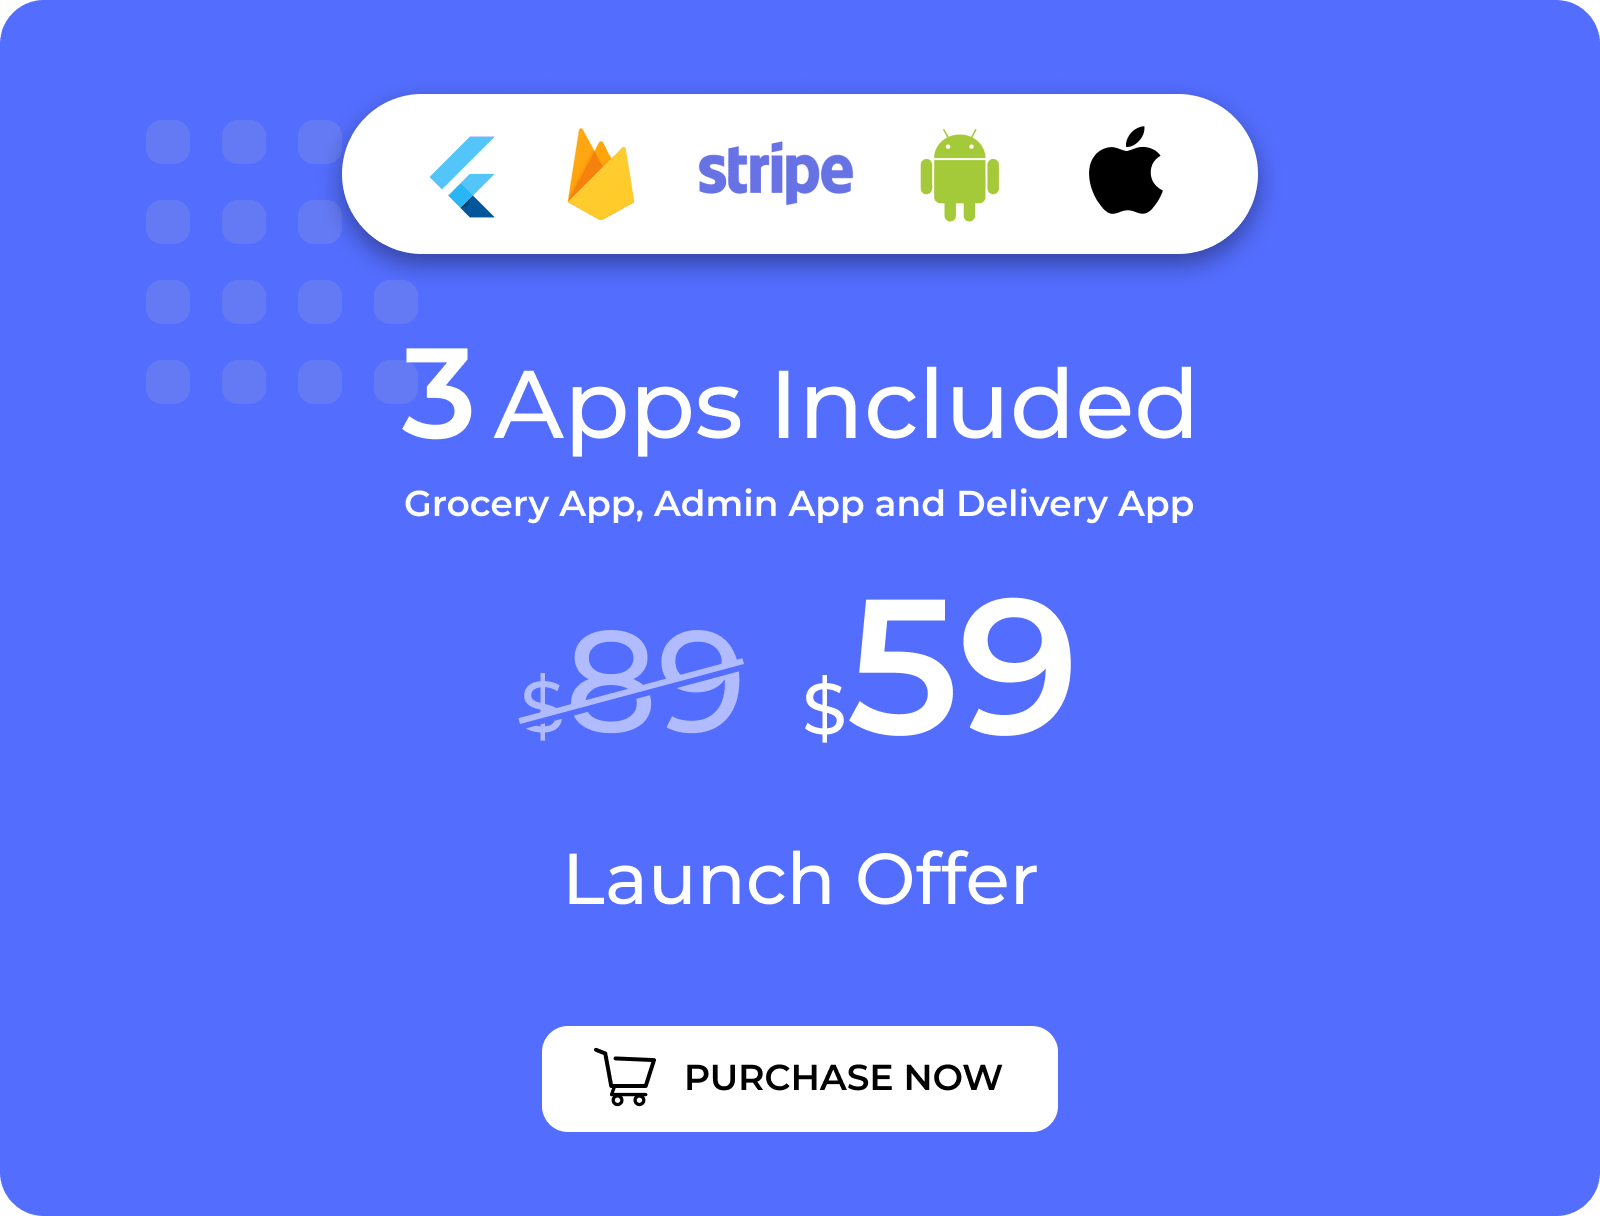 Grocery Store, Delivery app, Admin app - 2